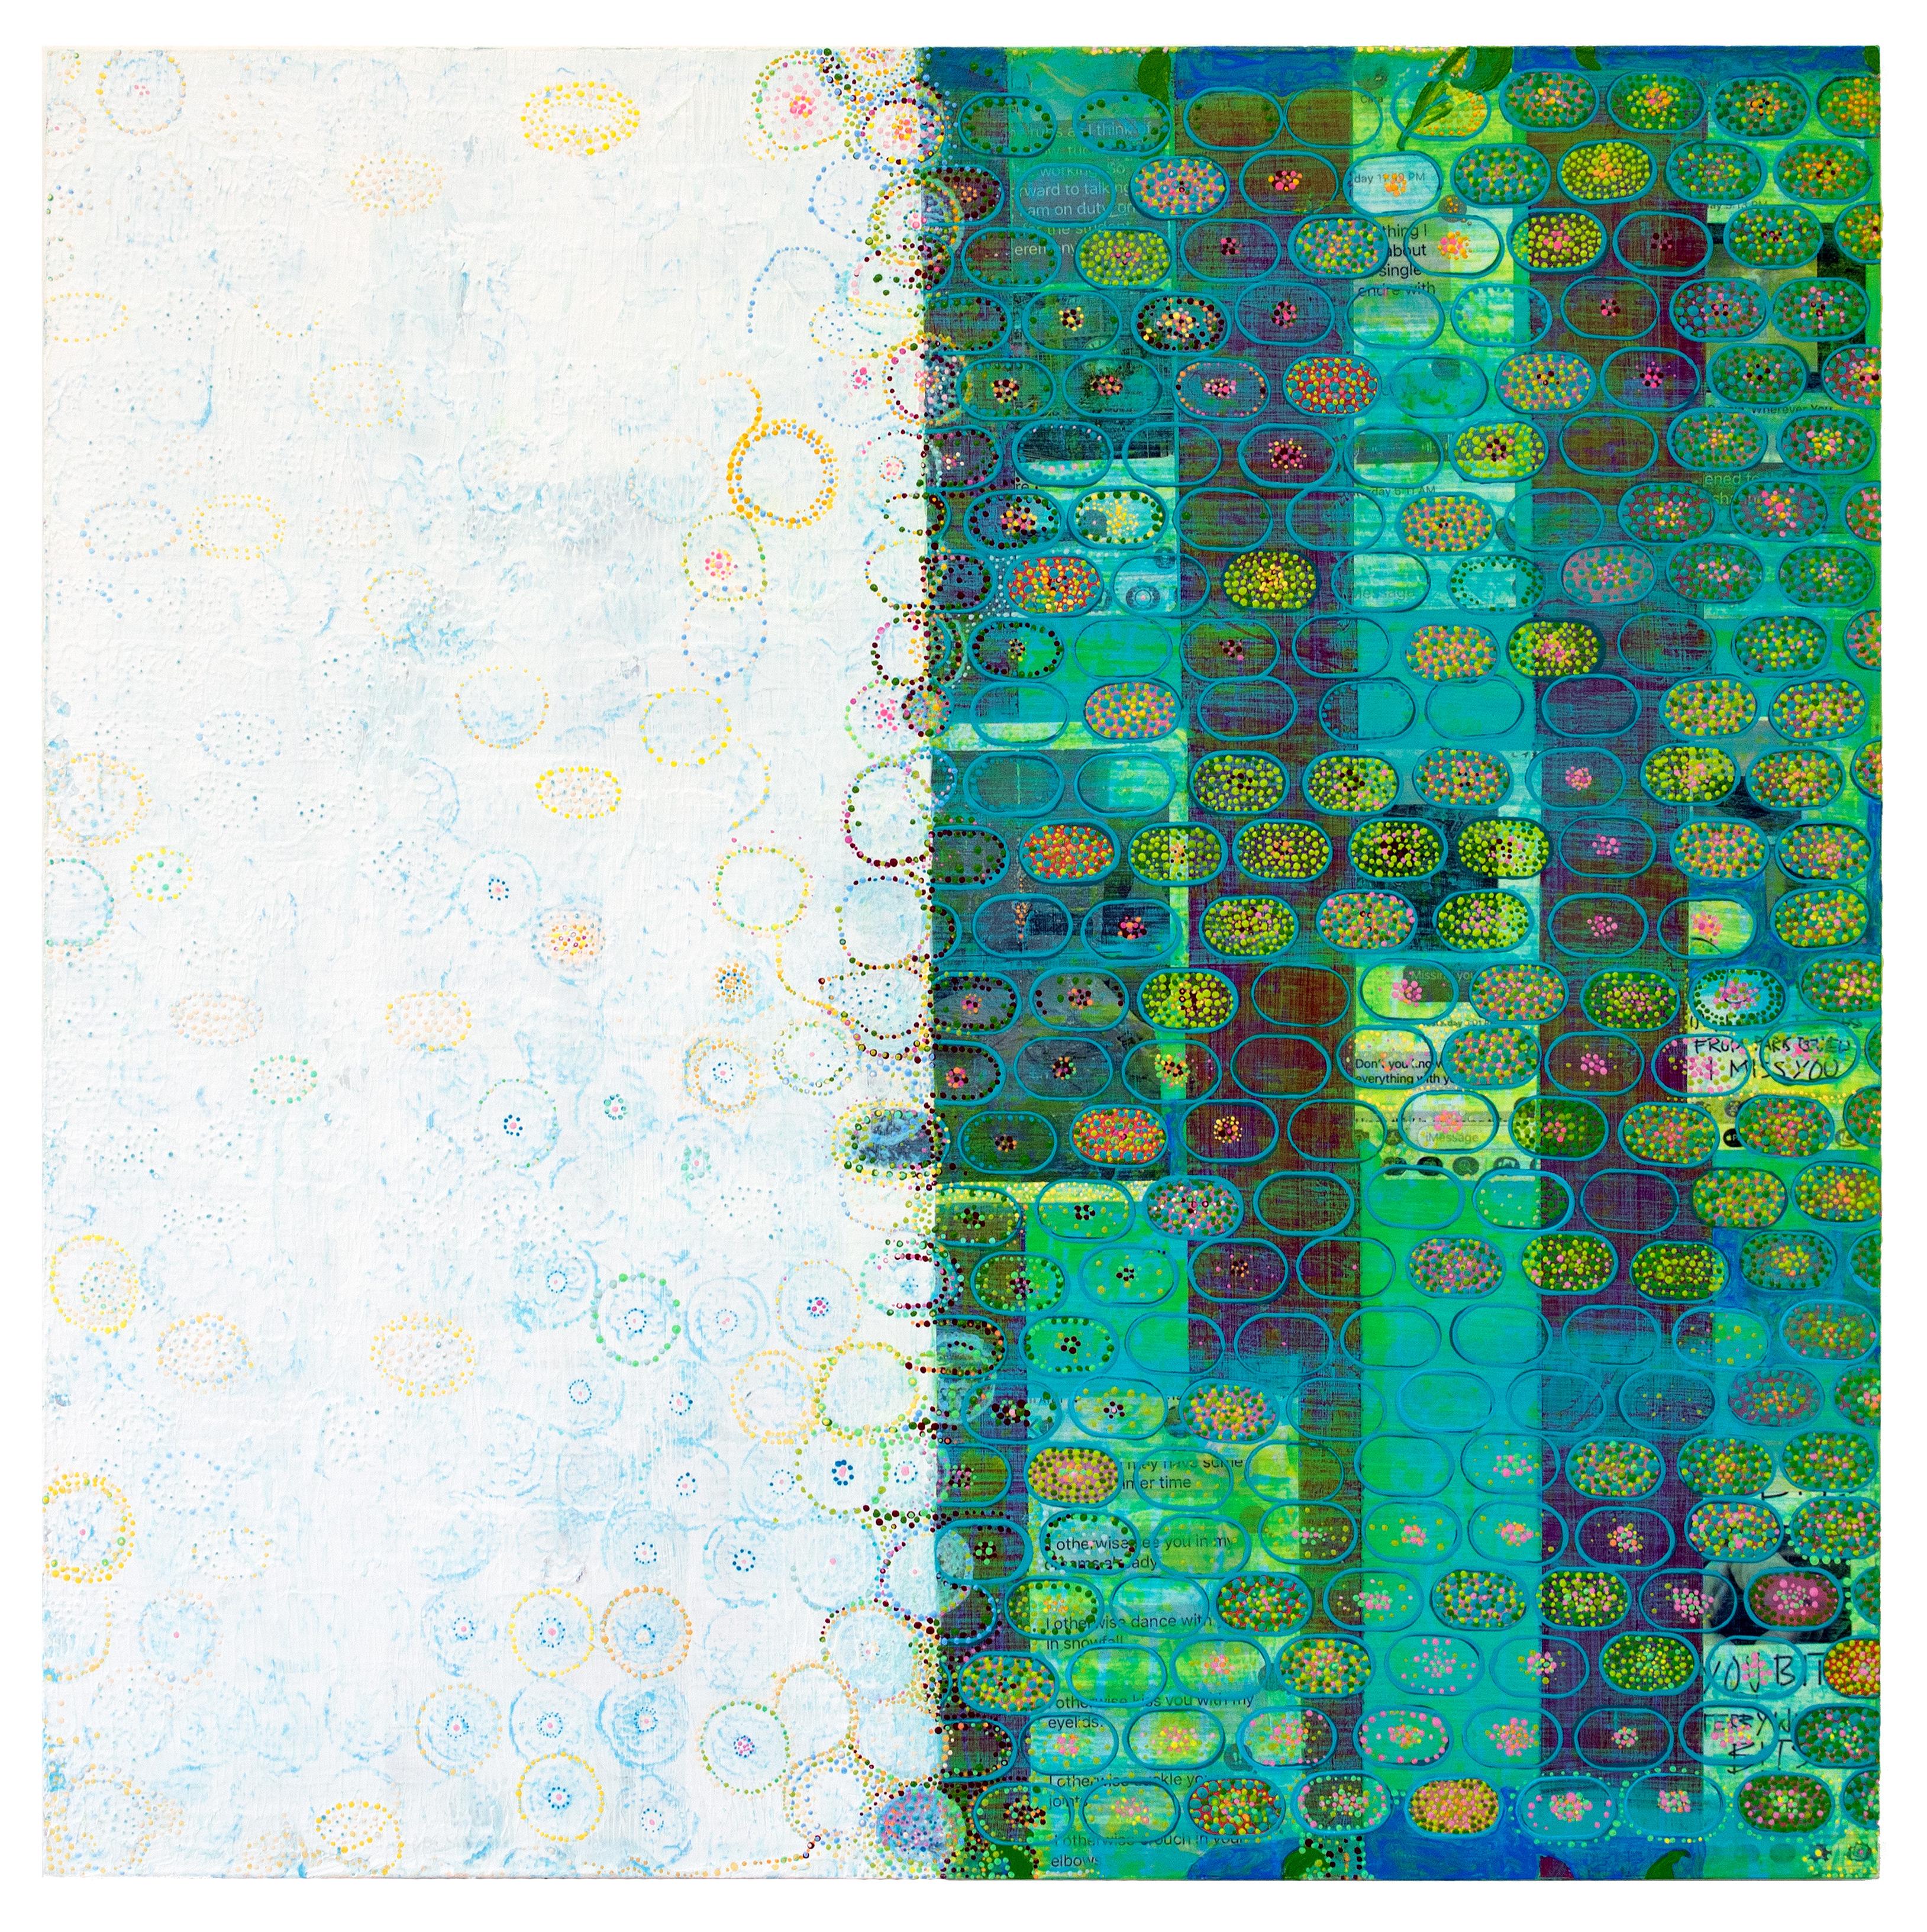 Diane Ayott
May, December, 2020
Mixed media on panel
30 x 30 in.
(ay103)

Diane Ayott's work is more about color and pattern than color and form, but the Boston-based artist is working her circles, dots and lines with structure and dimensionality.